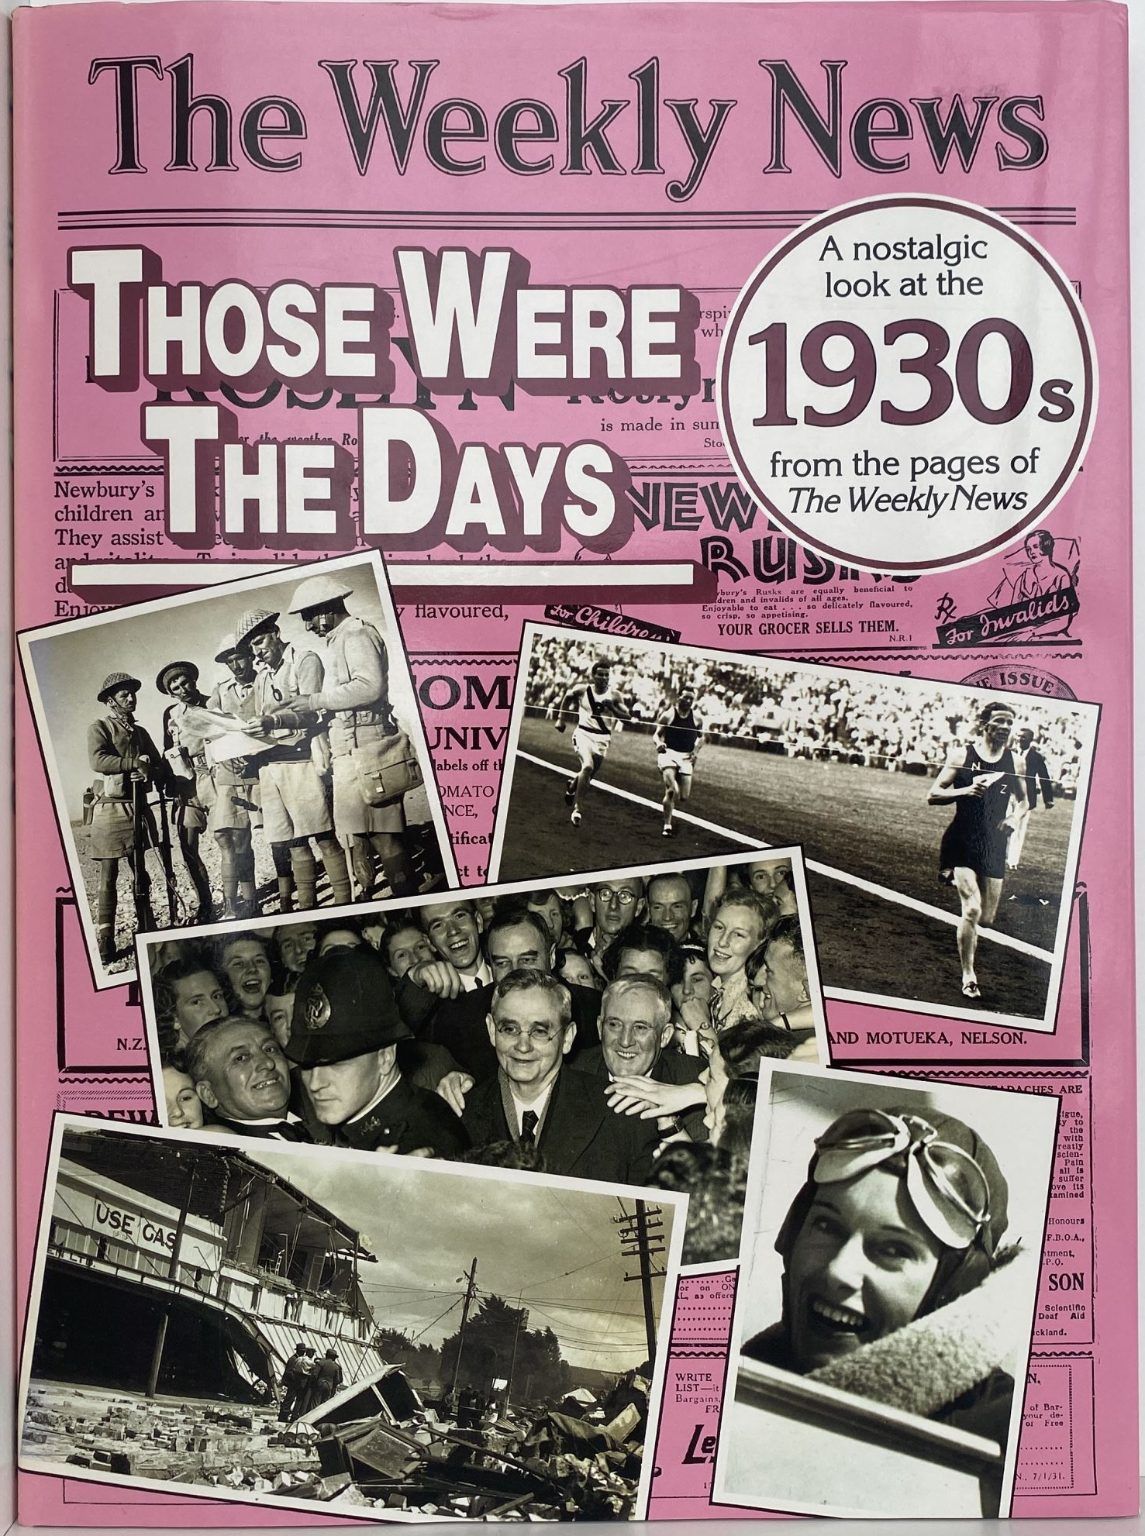 THOSE WERE THE DAYS: A nostalgic look at The Weekly News 1930s